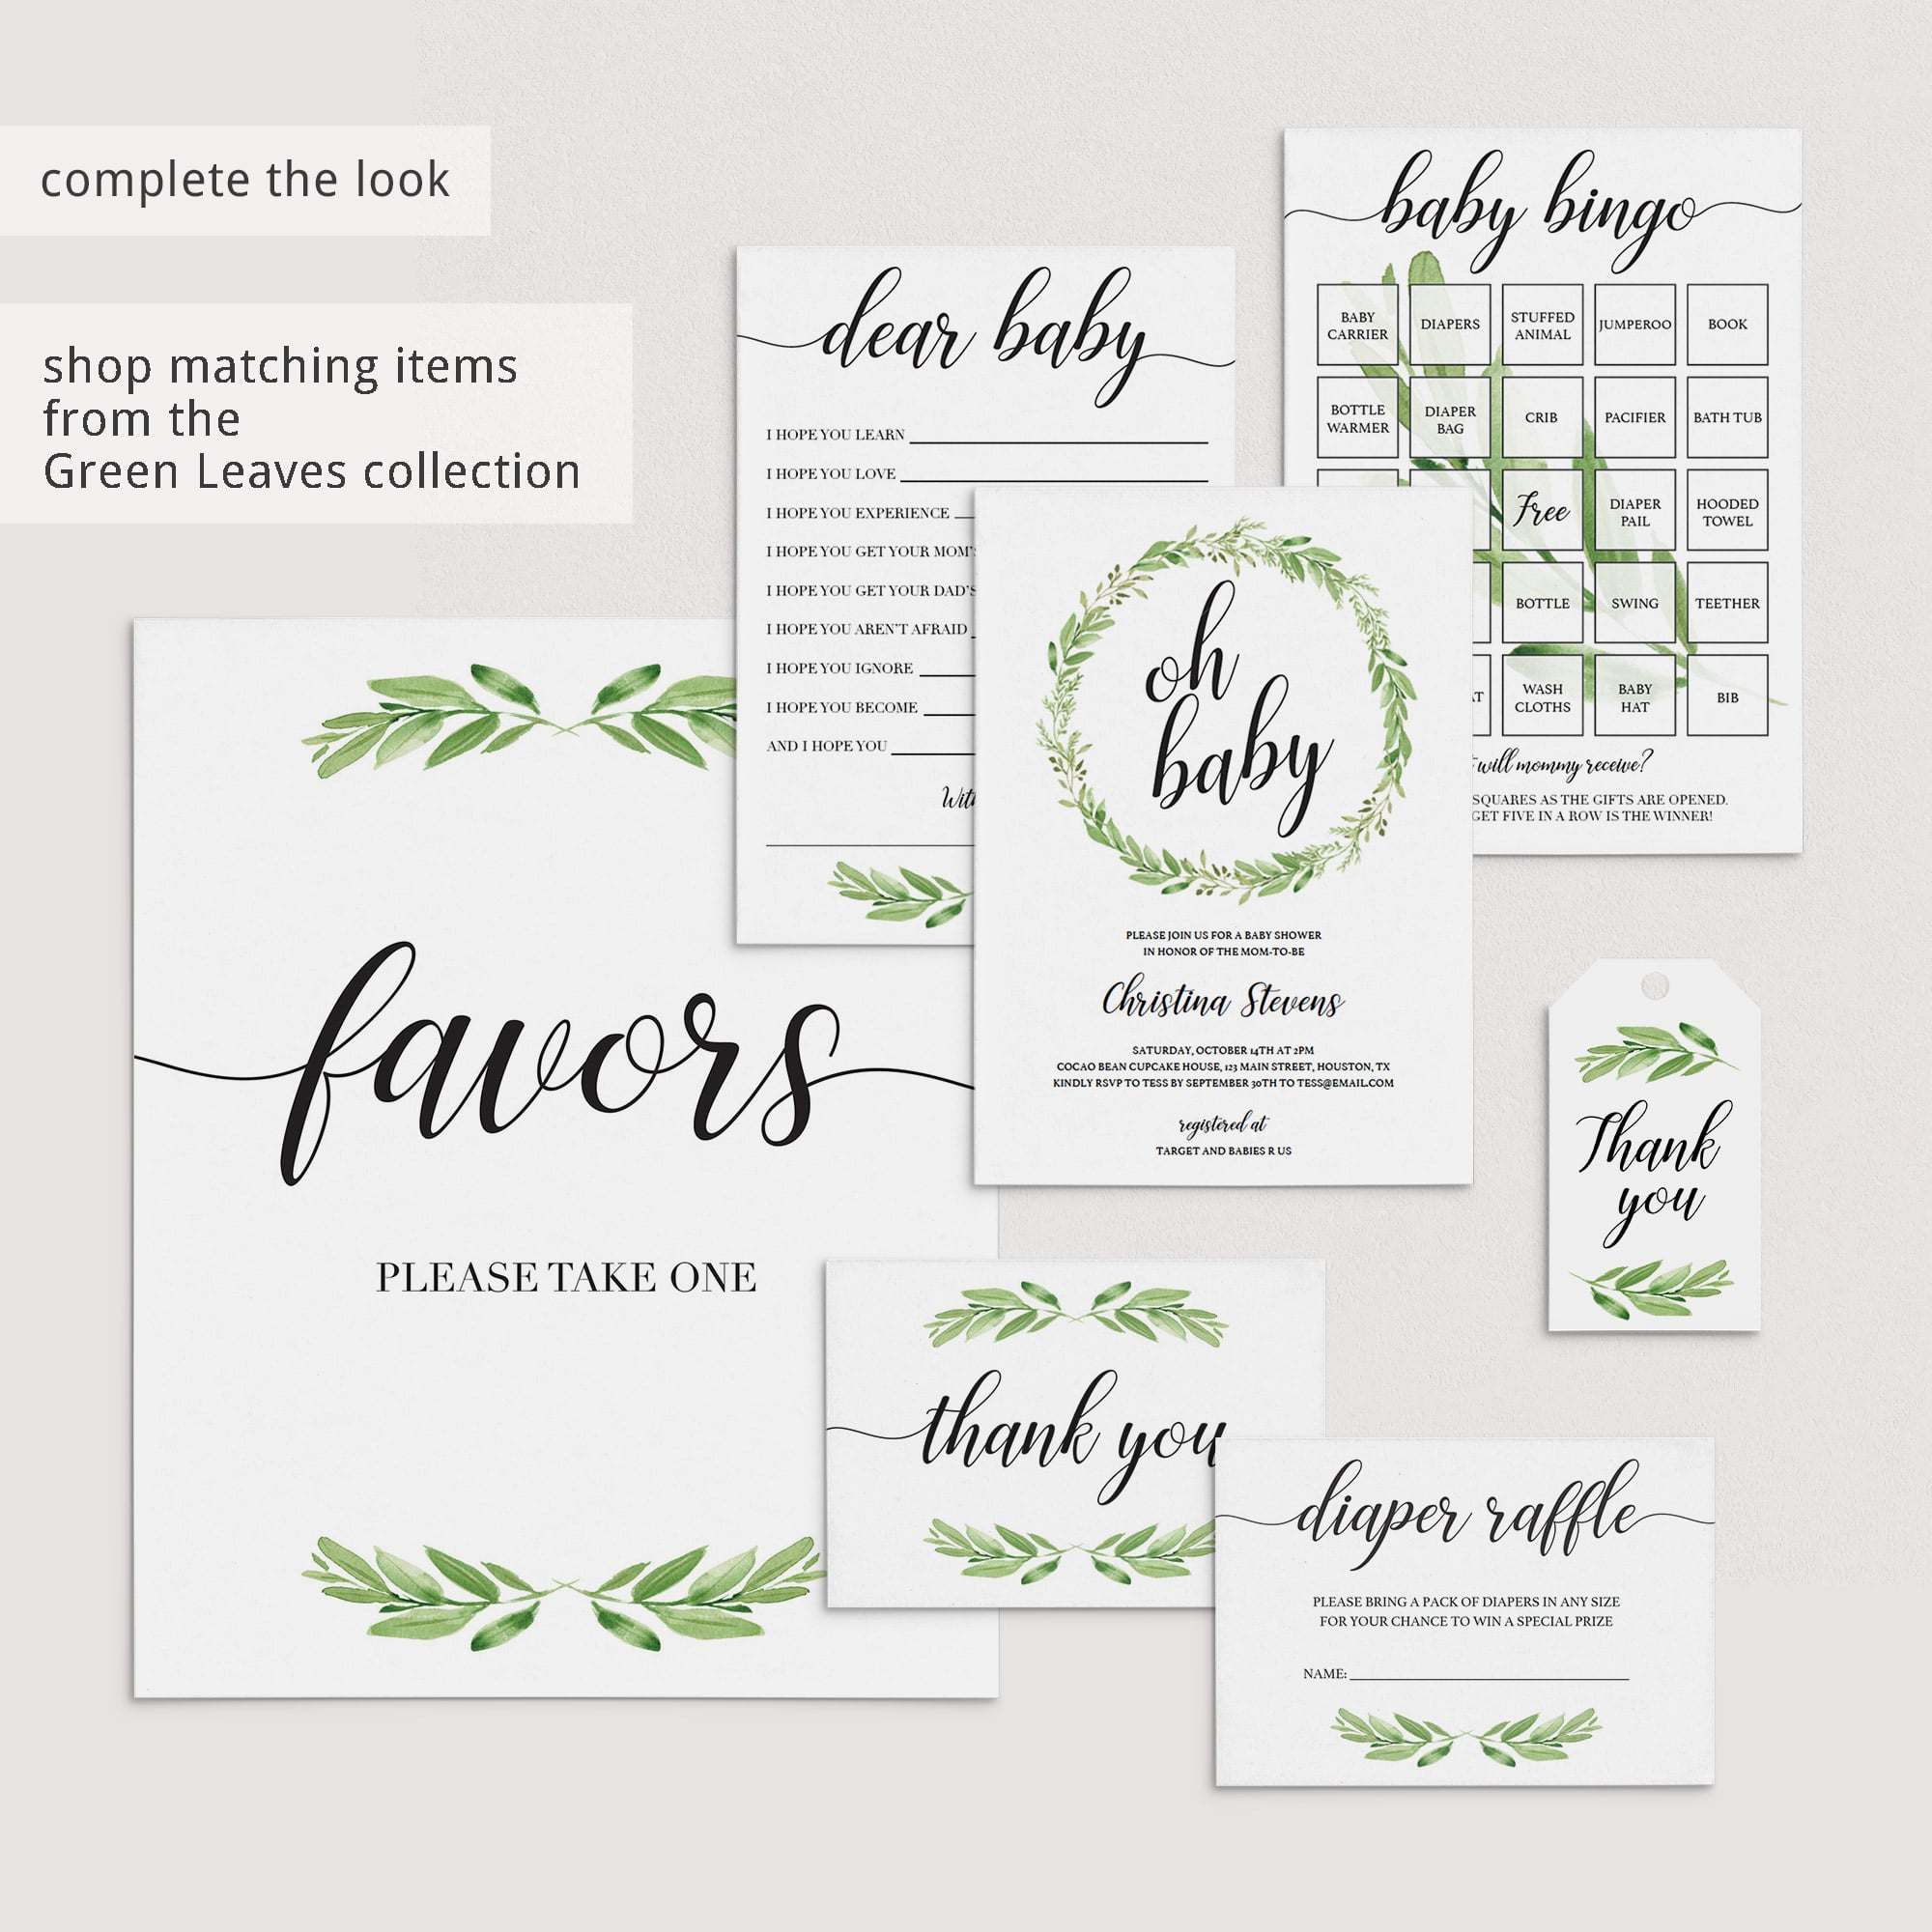 Green leaves baby shower ideas by LittleSizzle